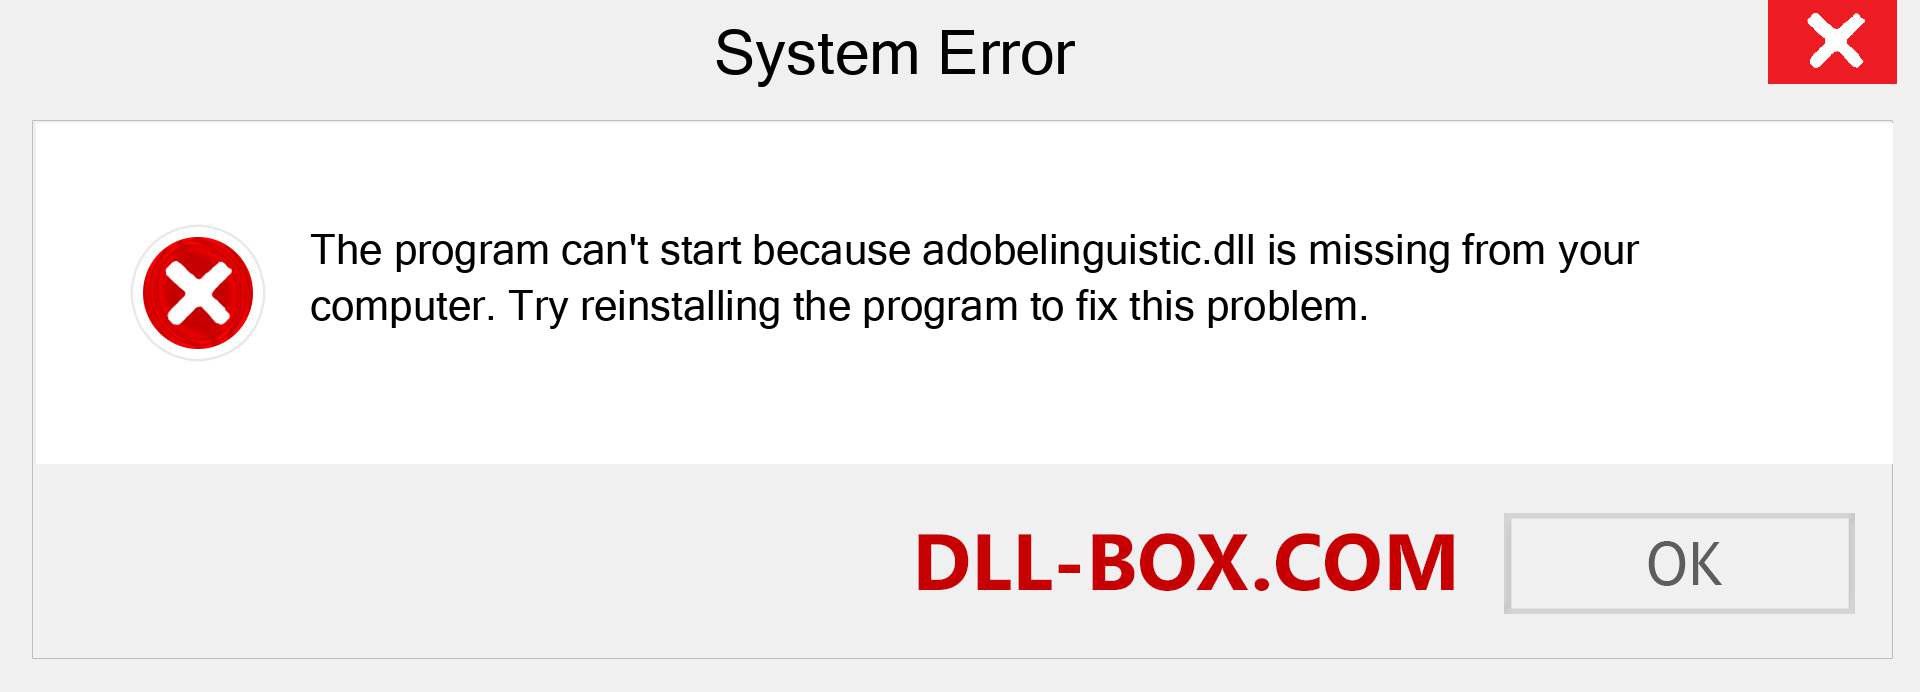  adobelinguistic.dll file is missing?. Download for Windows 7, 8, 10 - Fix  adobelinguistic dll Missing Error on Windows, photos, images